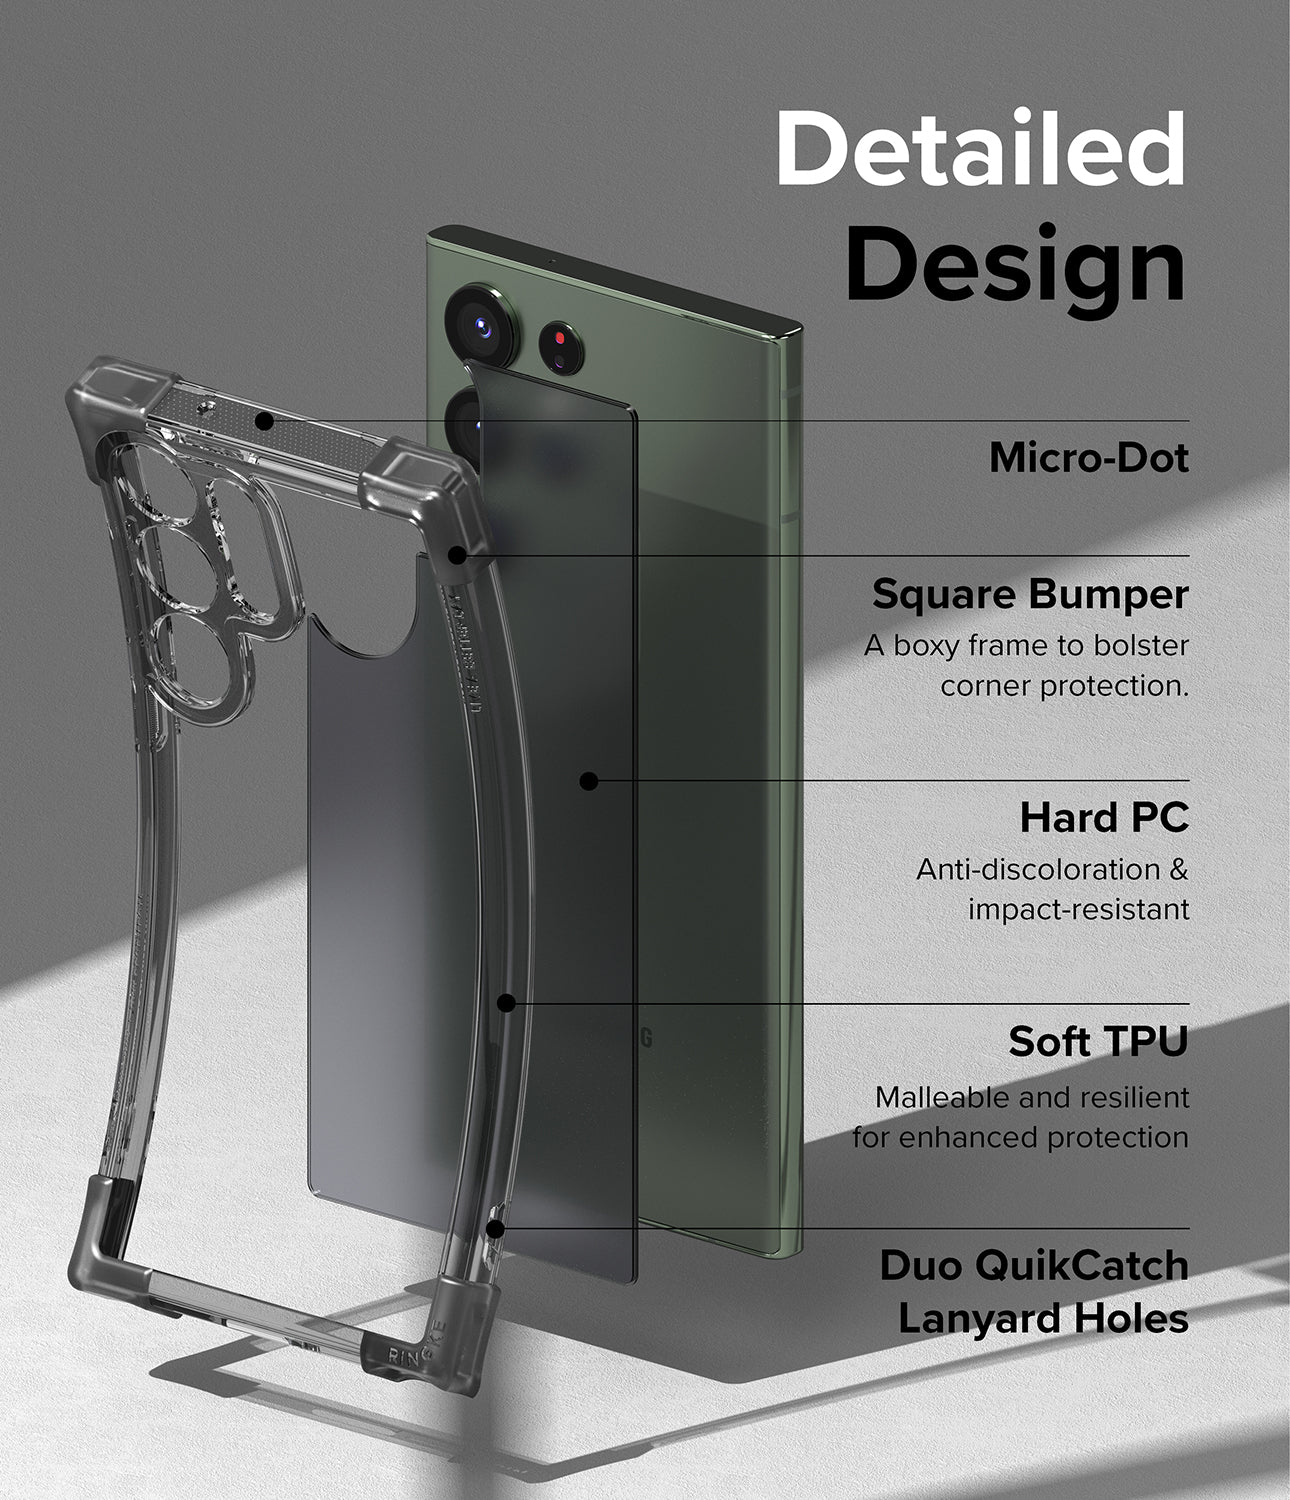 Galaxy S23 Ultra Case | Fusion Bumper - Matte Smoke Black - Detailed Design. Micro-Dot. A boxy frame to bolster corner protection with Square Bumper. Anti-discoloration and impact-resistant with Hard PC. Malleable and resilient for enhanced protection. Duo QuikCatch Lanyard Holes.